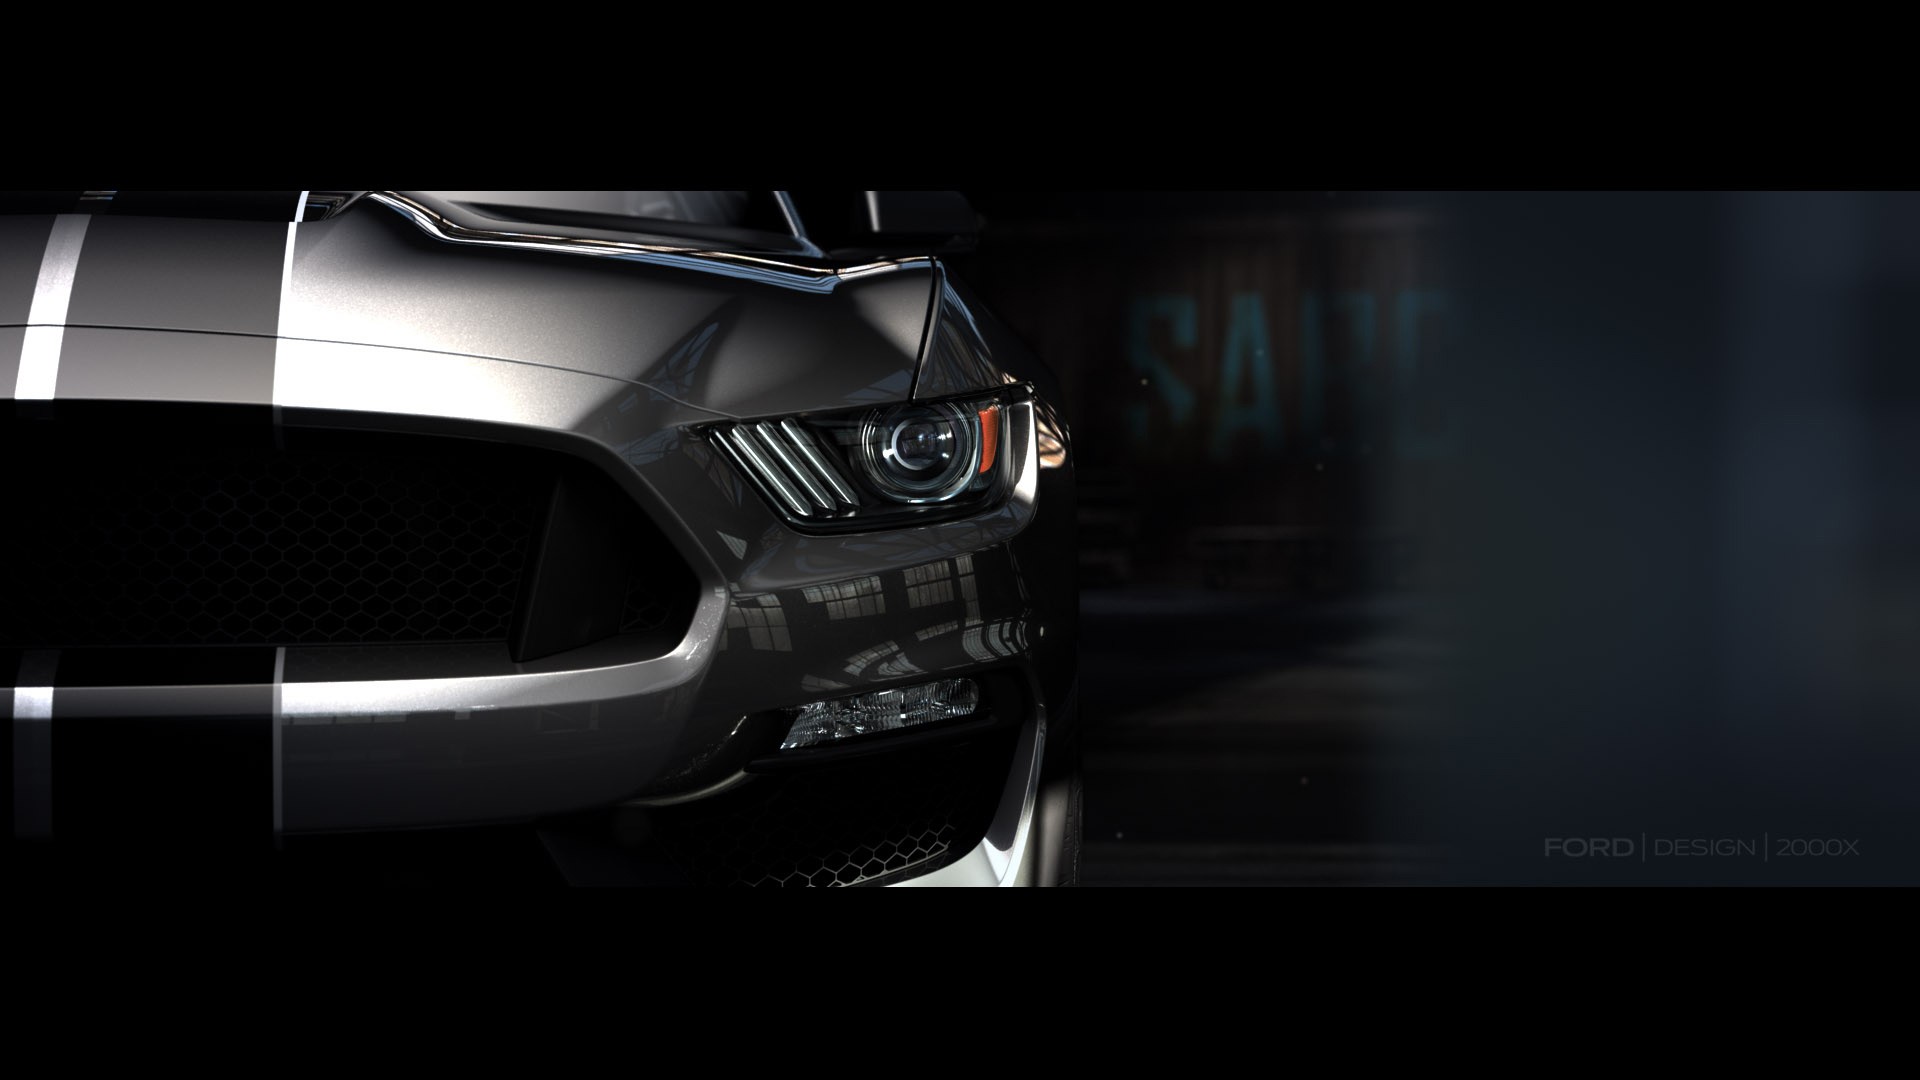 General 1920x1080 car Ford Mustang Shelby Ford Ford Mustang closeup silver cars Ford Mustang S550 frontal view